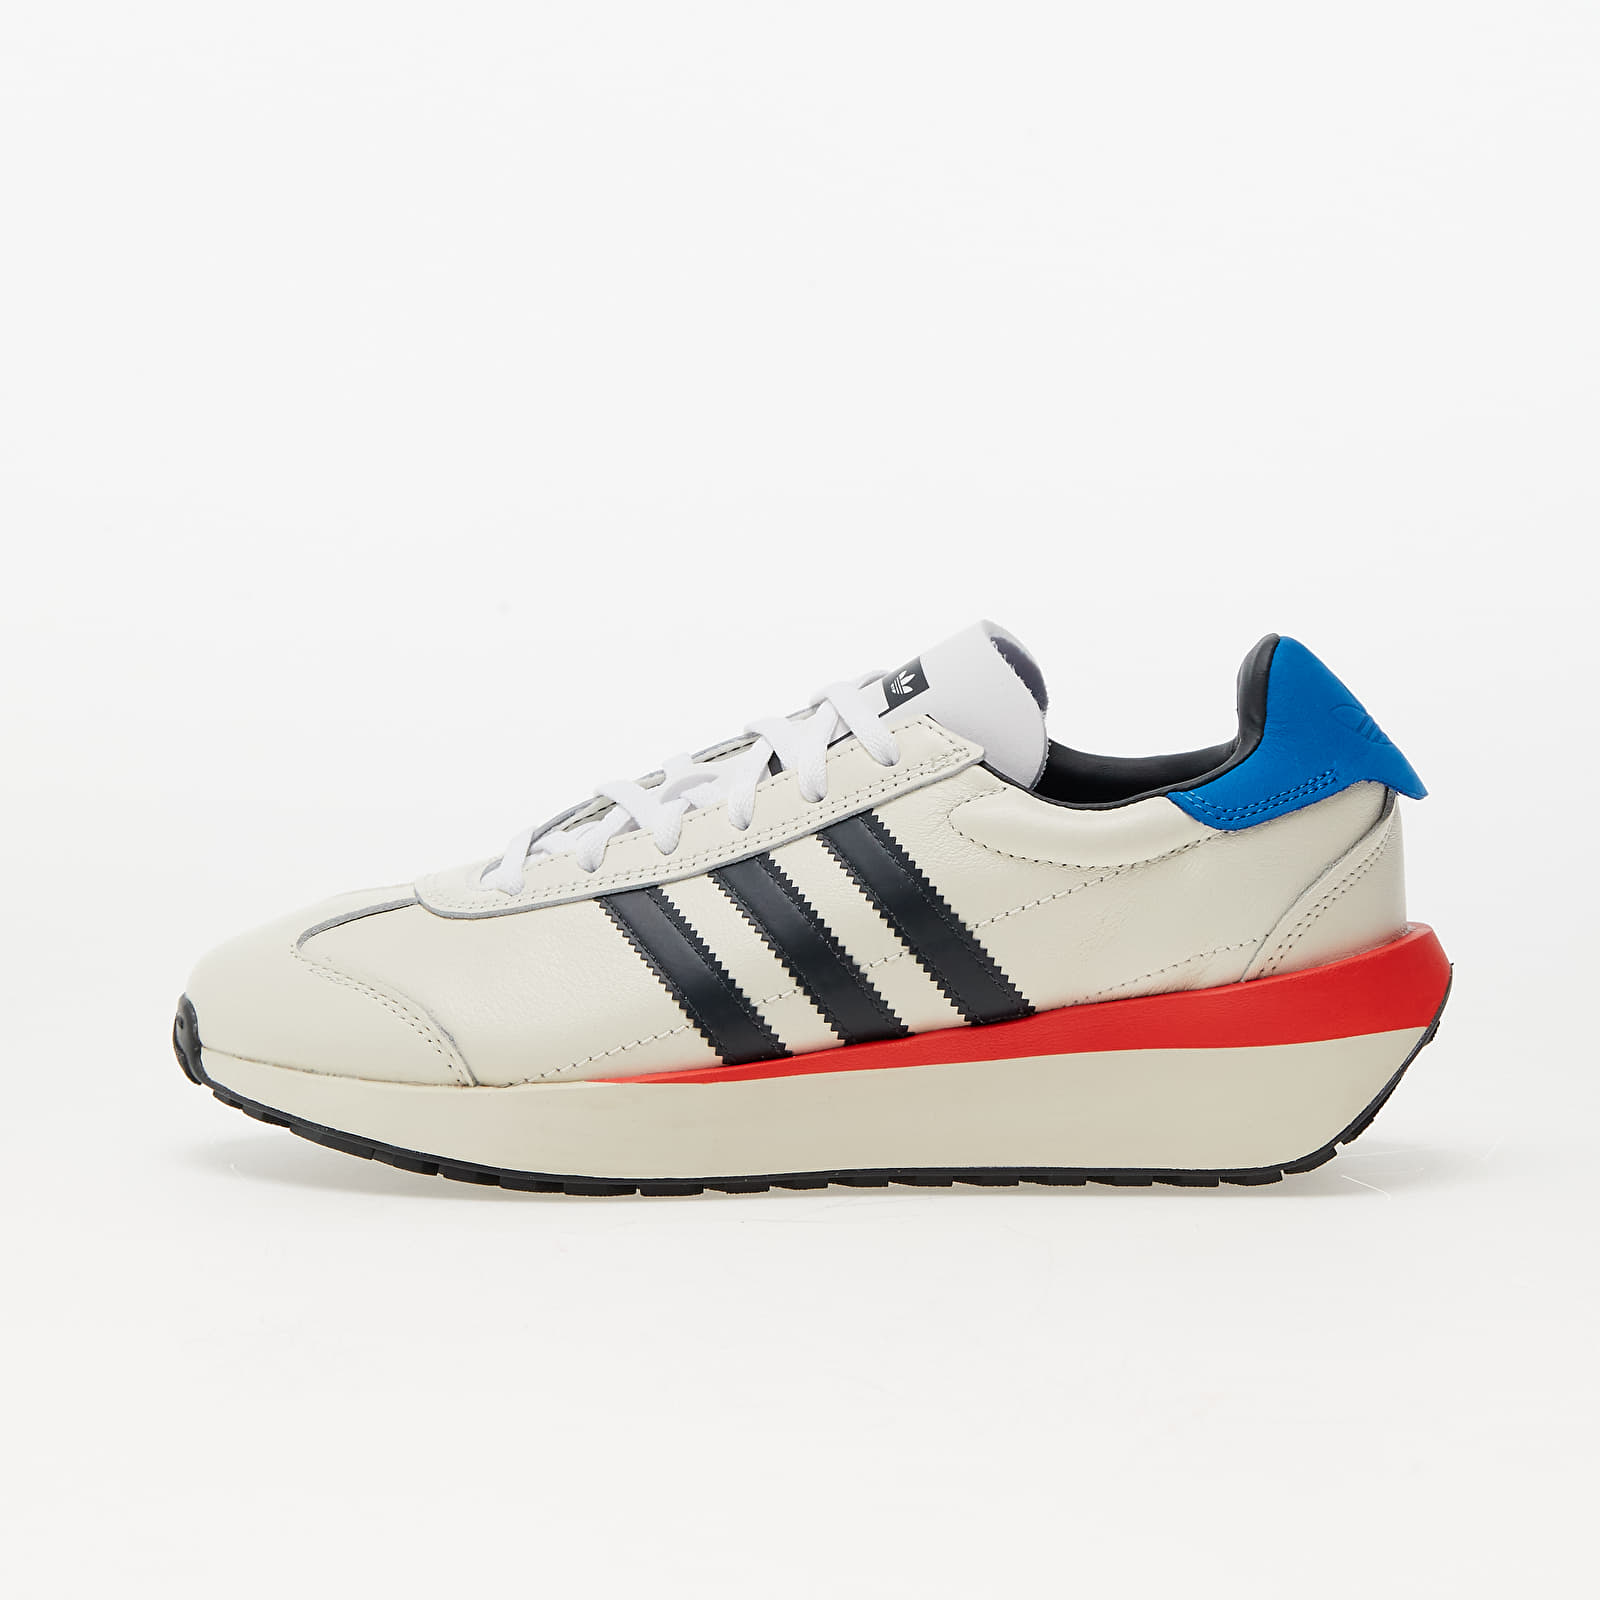 Men's shoes adidas Country Xlg Off White/ Carbon/ Blue Bird